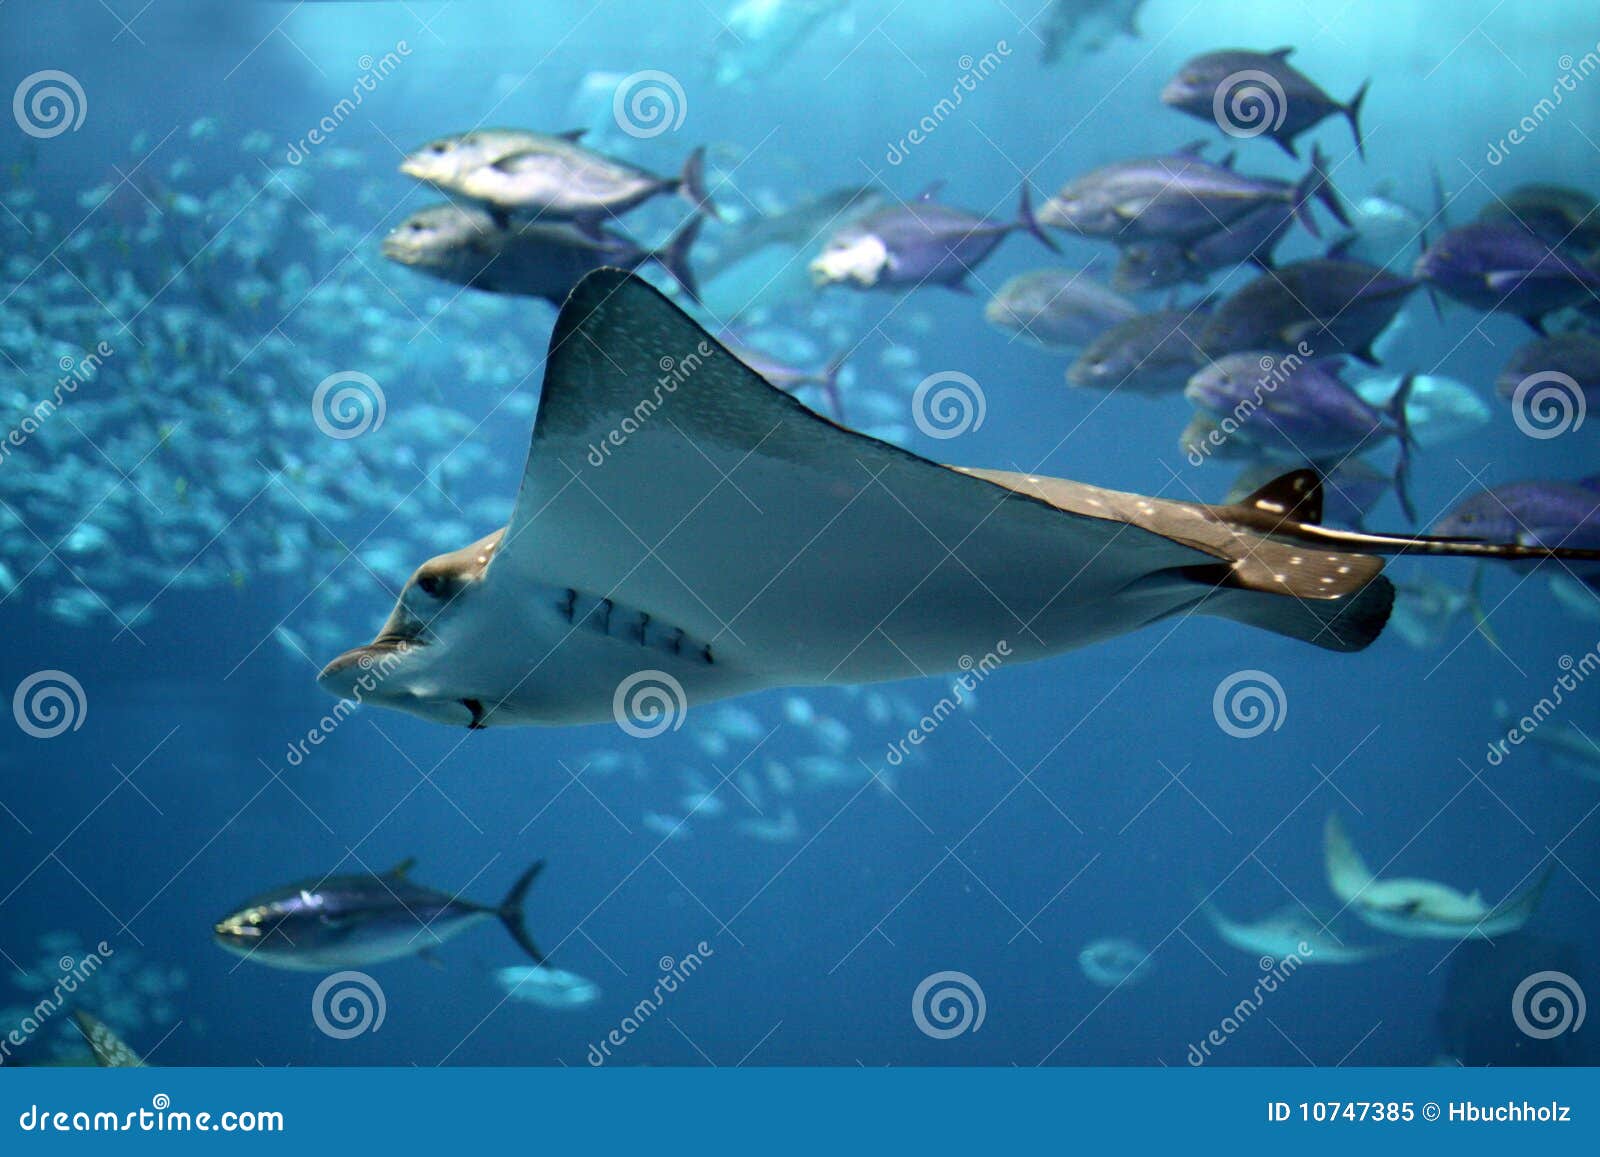 detail of a manta ray swimming underwater